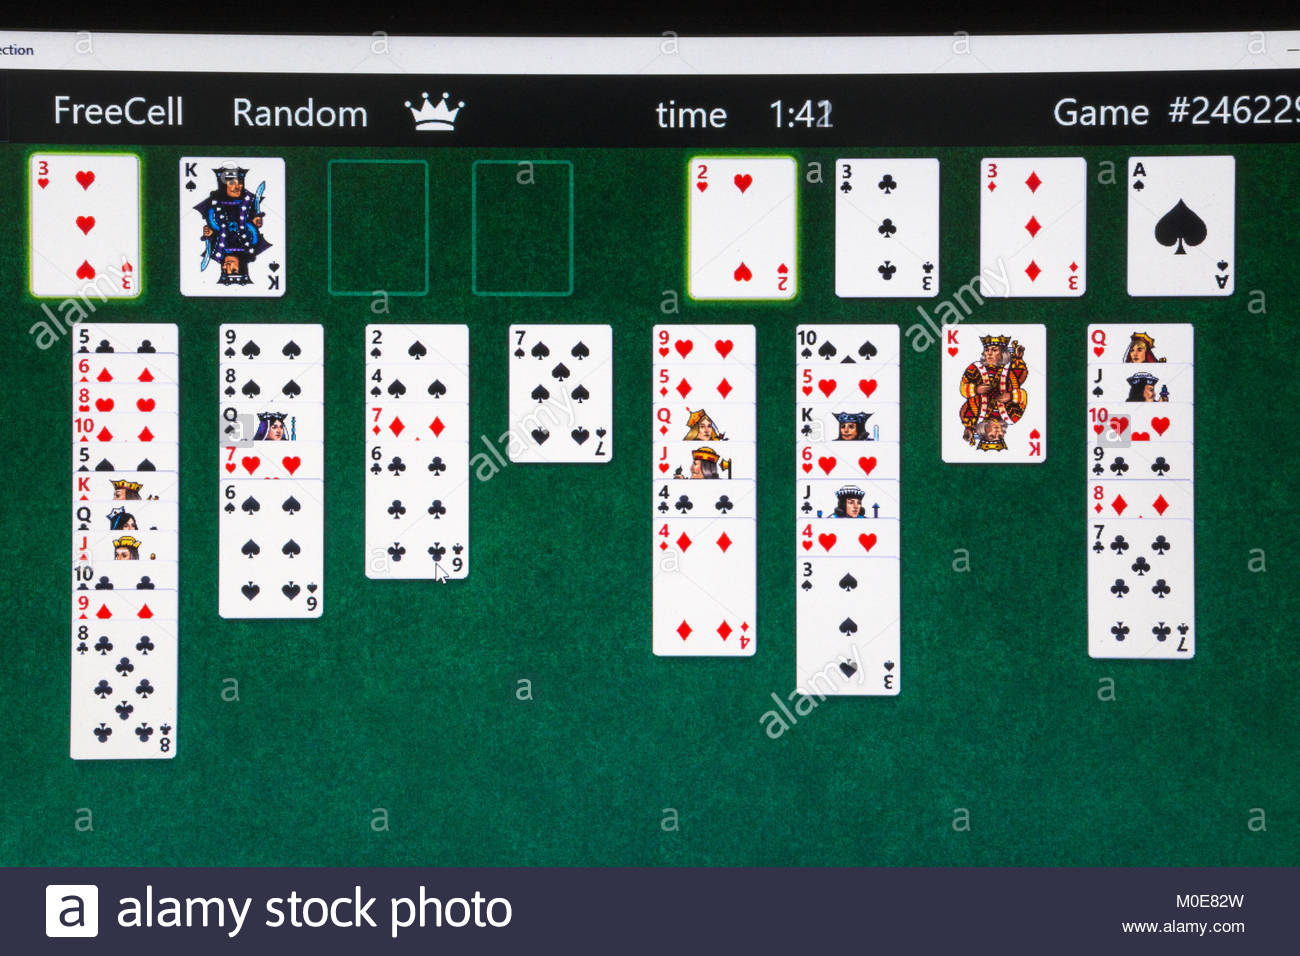 Restore My Microsoft Solitaire Collection Visitxaser